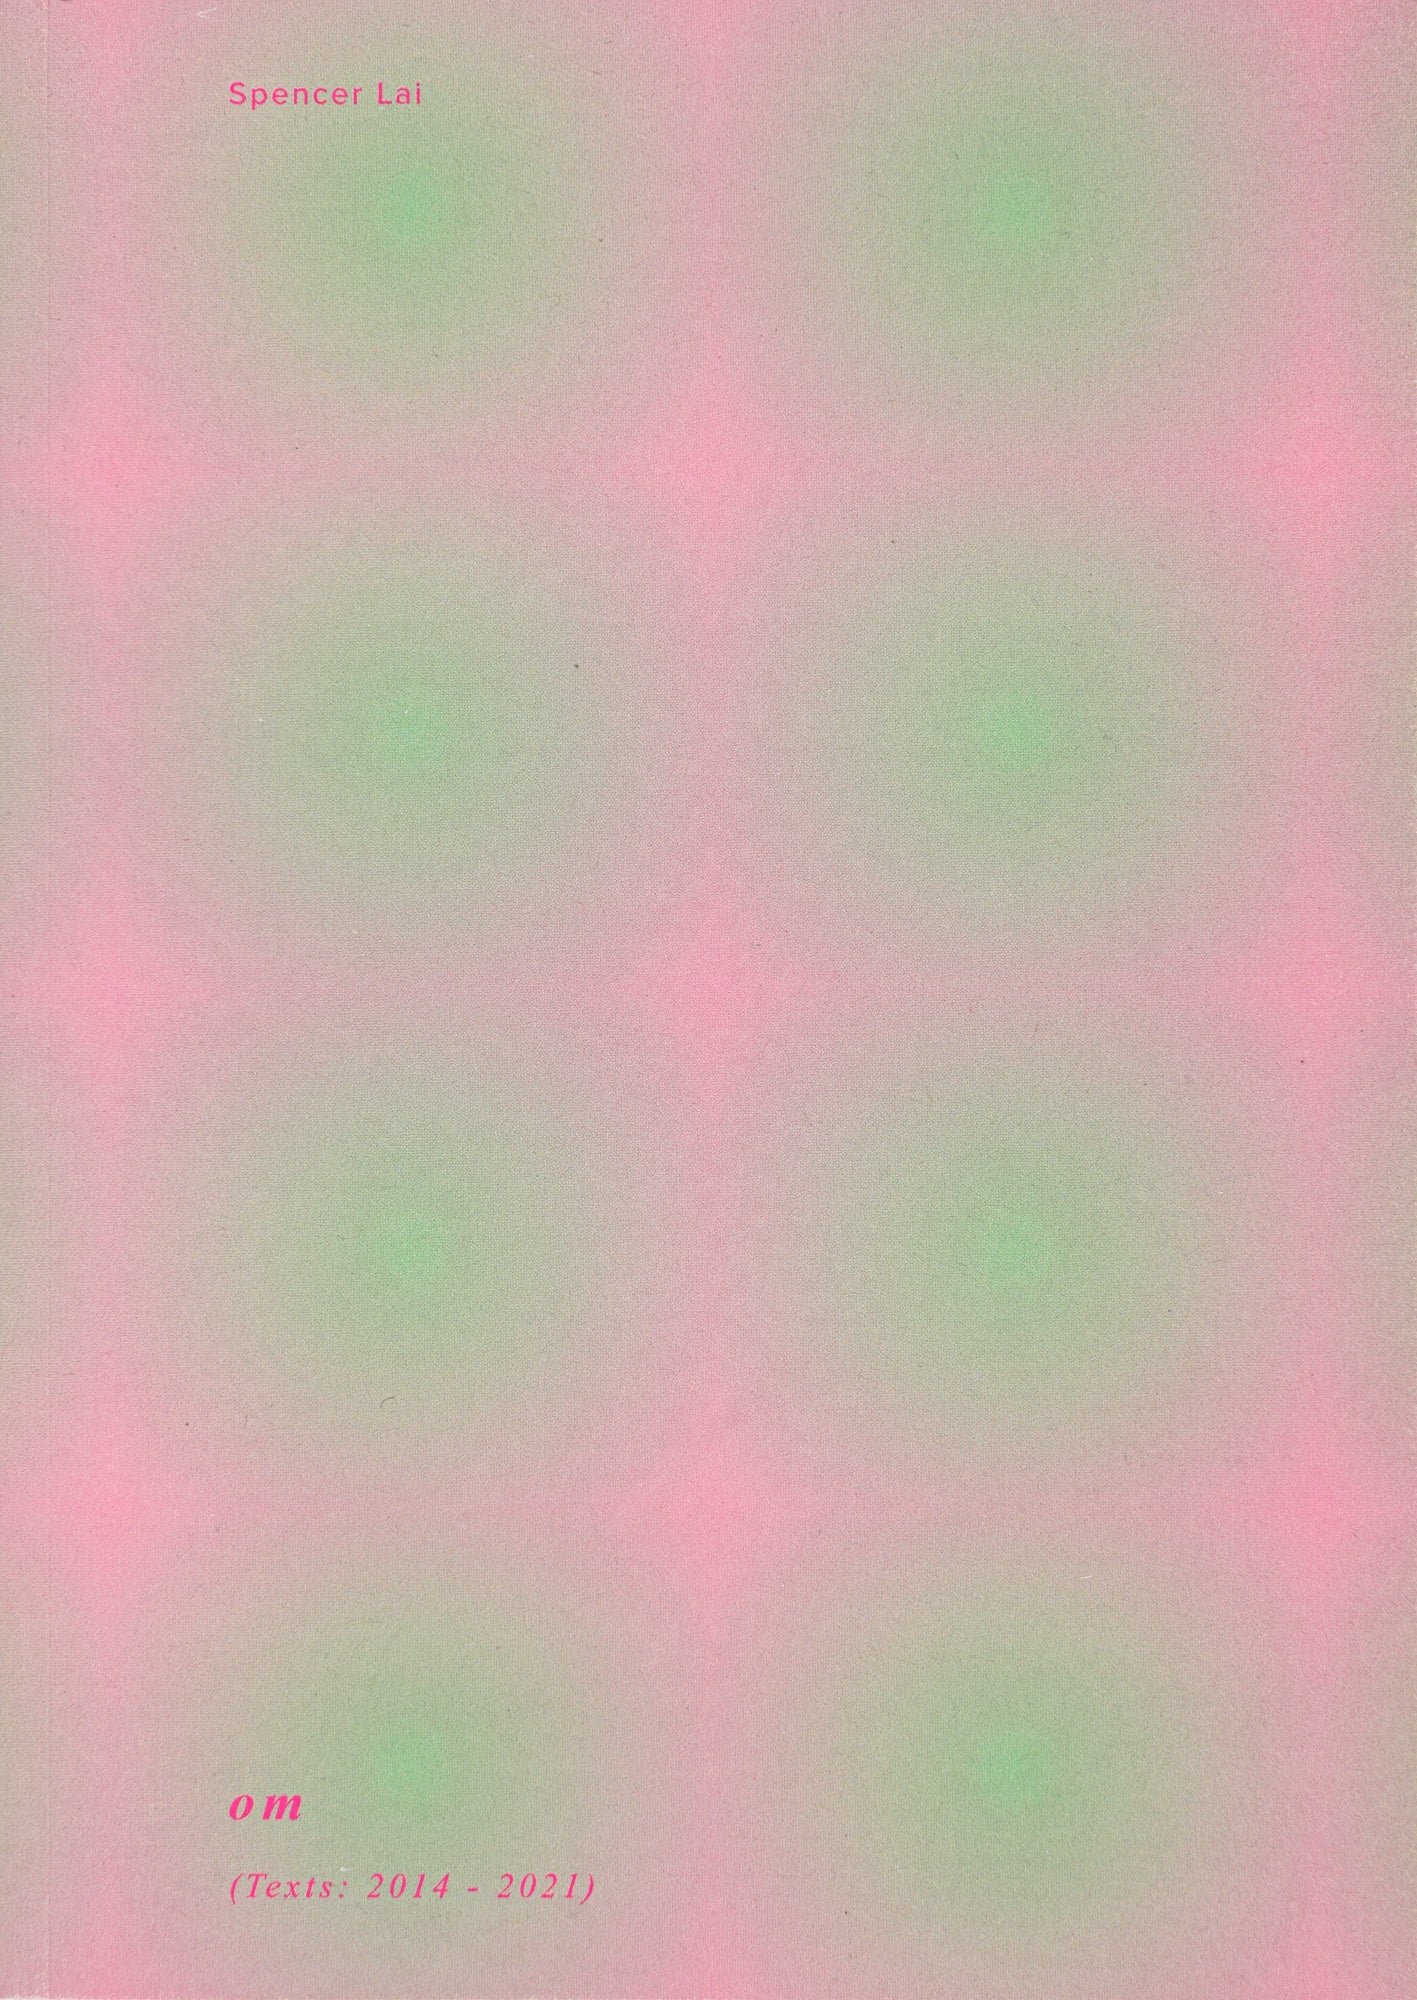 Book cover in light pink with eight light lime green round patches in it, alongside the author Spencer Lai on the top of the page and the title “om (Texts: 2014-2021)“ in italics on the Botton of the page.